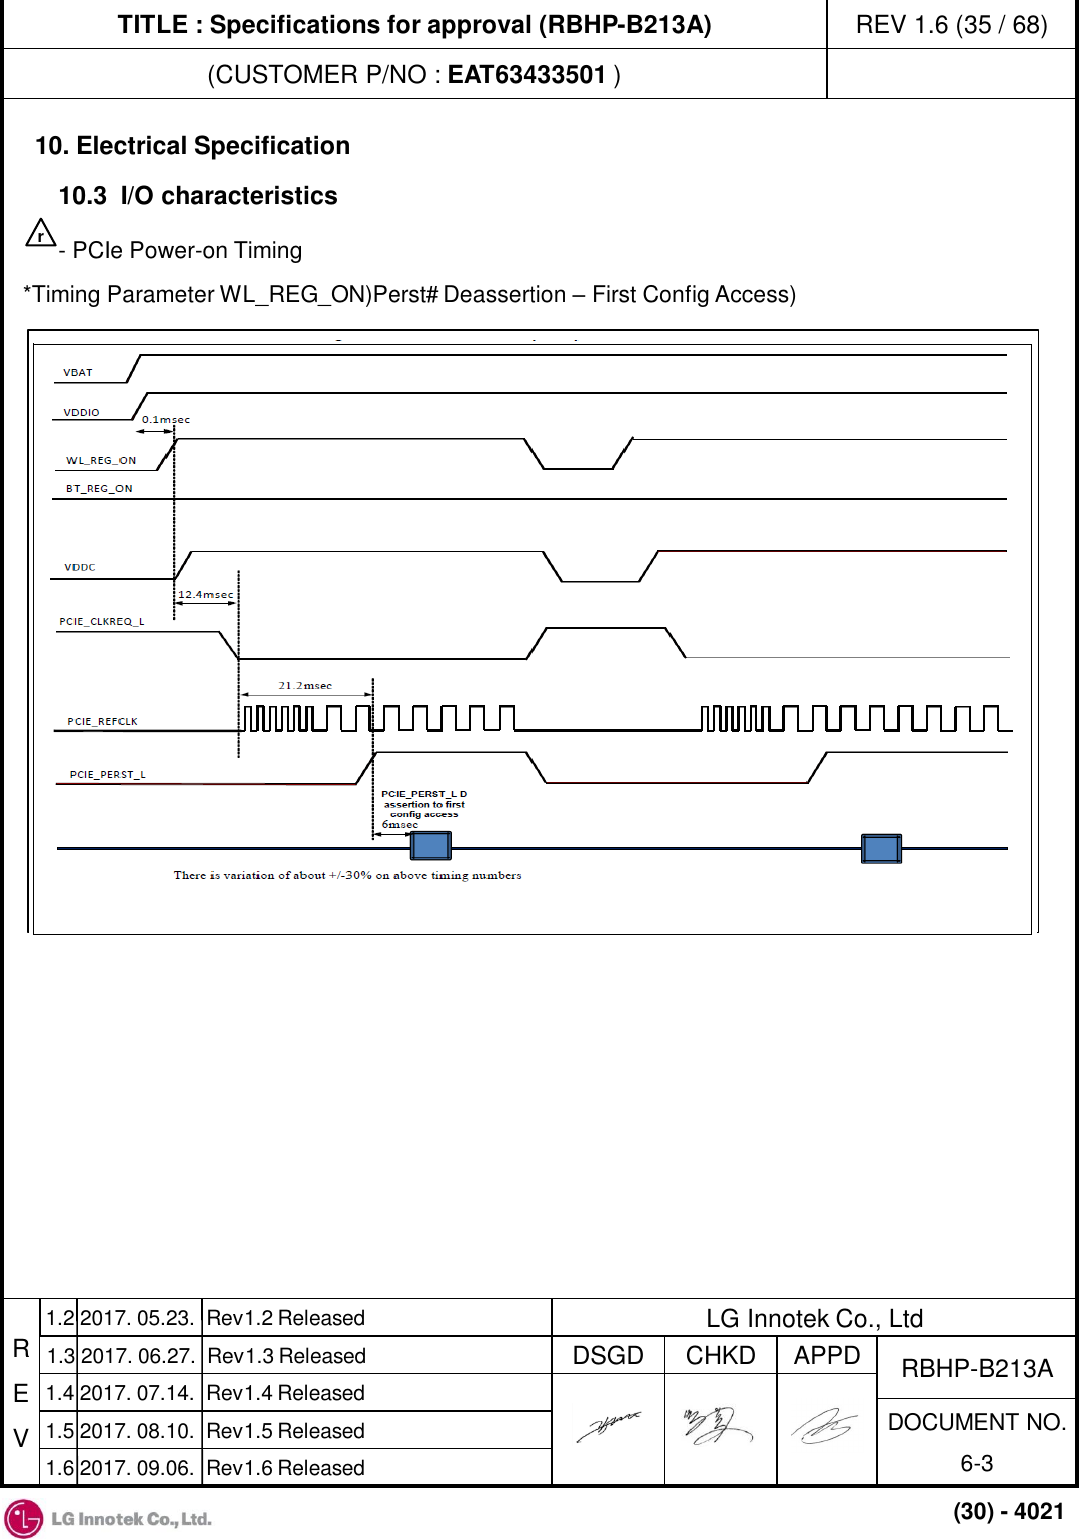 TITLE : Specifications for approval (RBHP-B213A) (CUSTOMER P/NO : EAT63433501 ) REV 1.6 (35 / 68) R E V APPD CHKD DSGD DOCUMENT NO. 6-3 RBHP-B213A LG Innotek Co., Ltd 1.4 2017. 07.14.  Rev1.4 Released 1.5 2017. 08.10.  Rev1.5 Released (30) - 4021 1.2 2017. 05.23.  Rev1.2 Released 1.3 2017. 06.27.  Rev1.3 Released 1.6 2017. 09.06.  Rev1.6 Released 10. Electrical Specification 10.3  I/O characteristics  - PCIe Power-on Timing *Timing Parameter WL_REG_ON)Perst# Deassertion – First Config Access) r 